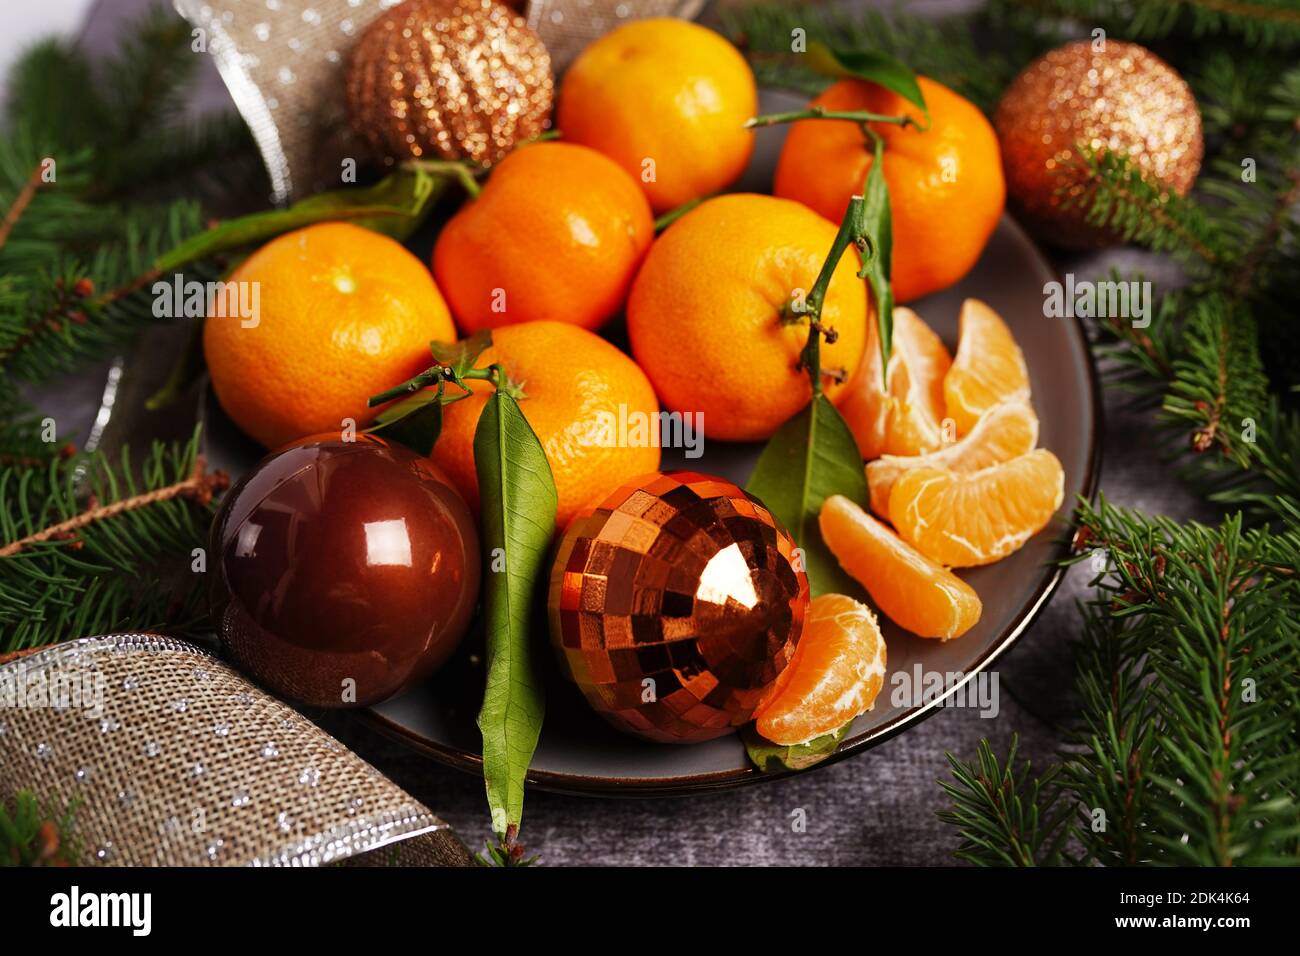 Fresh Clementines or Tangerines on plste on gray Table with christmas balls and Tree Branches Stock Photo